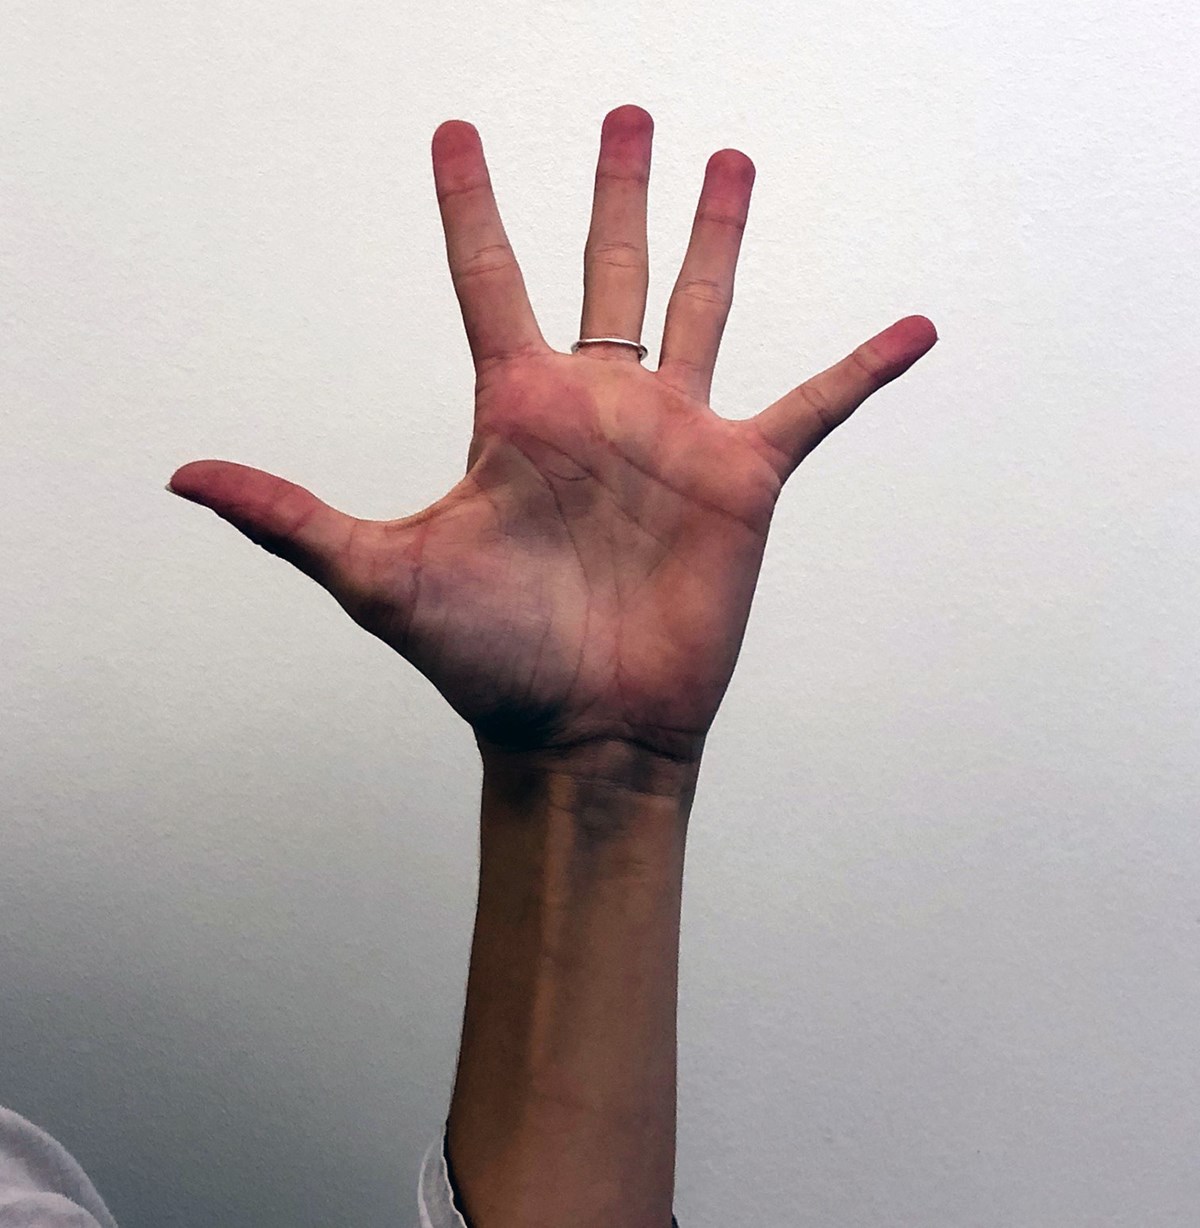 A hand is spread out so each finger is as far away as possible 